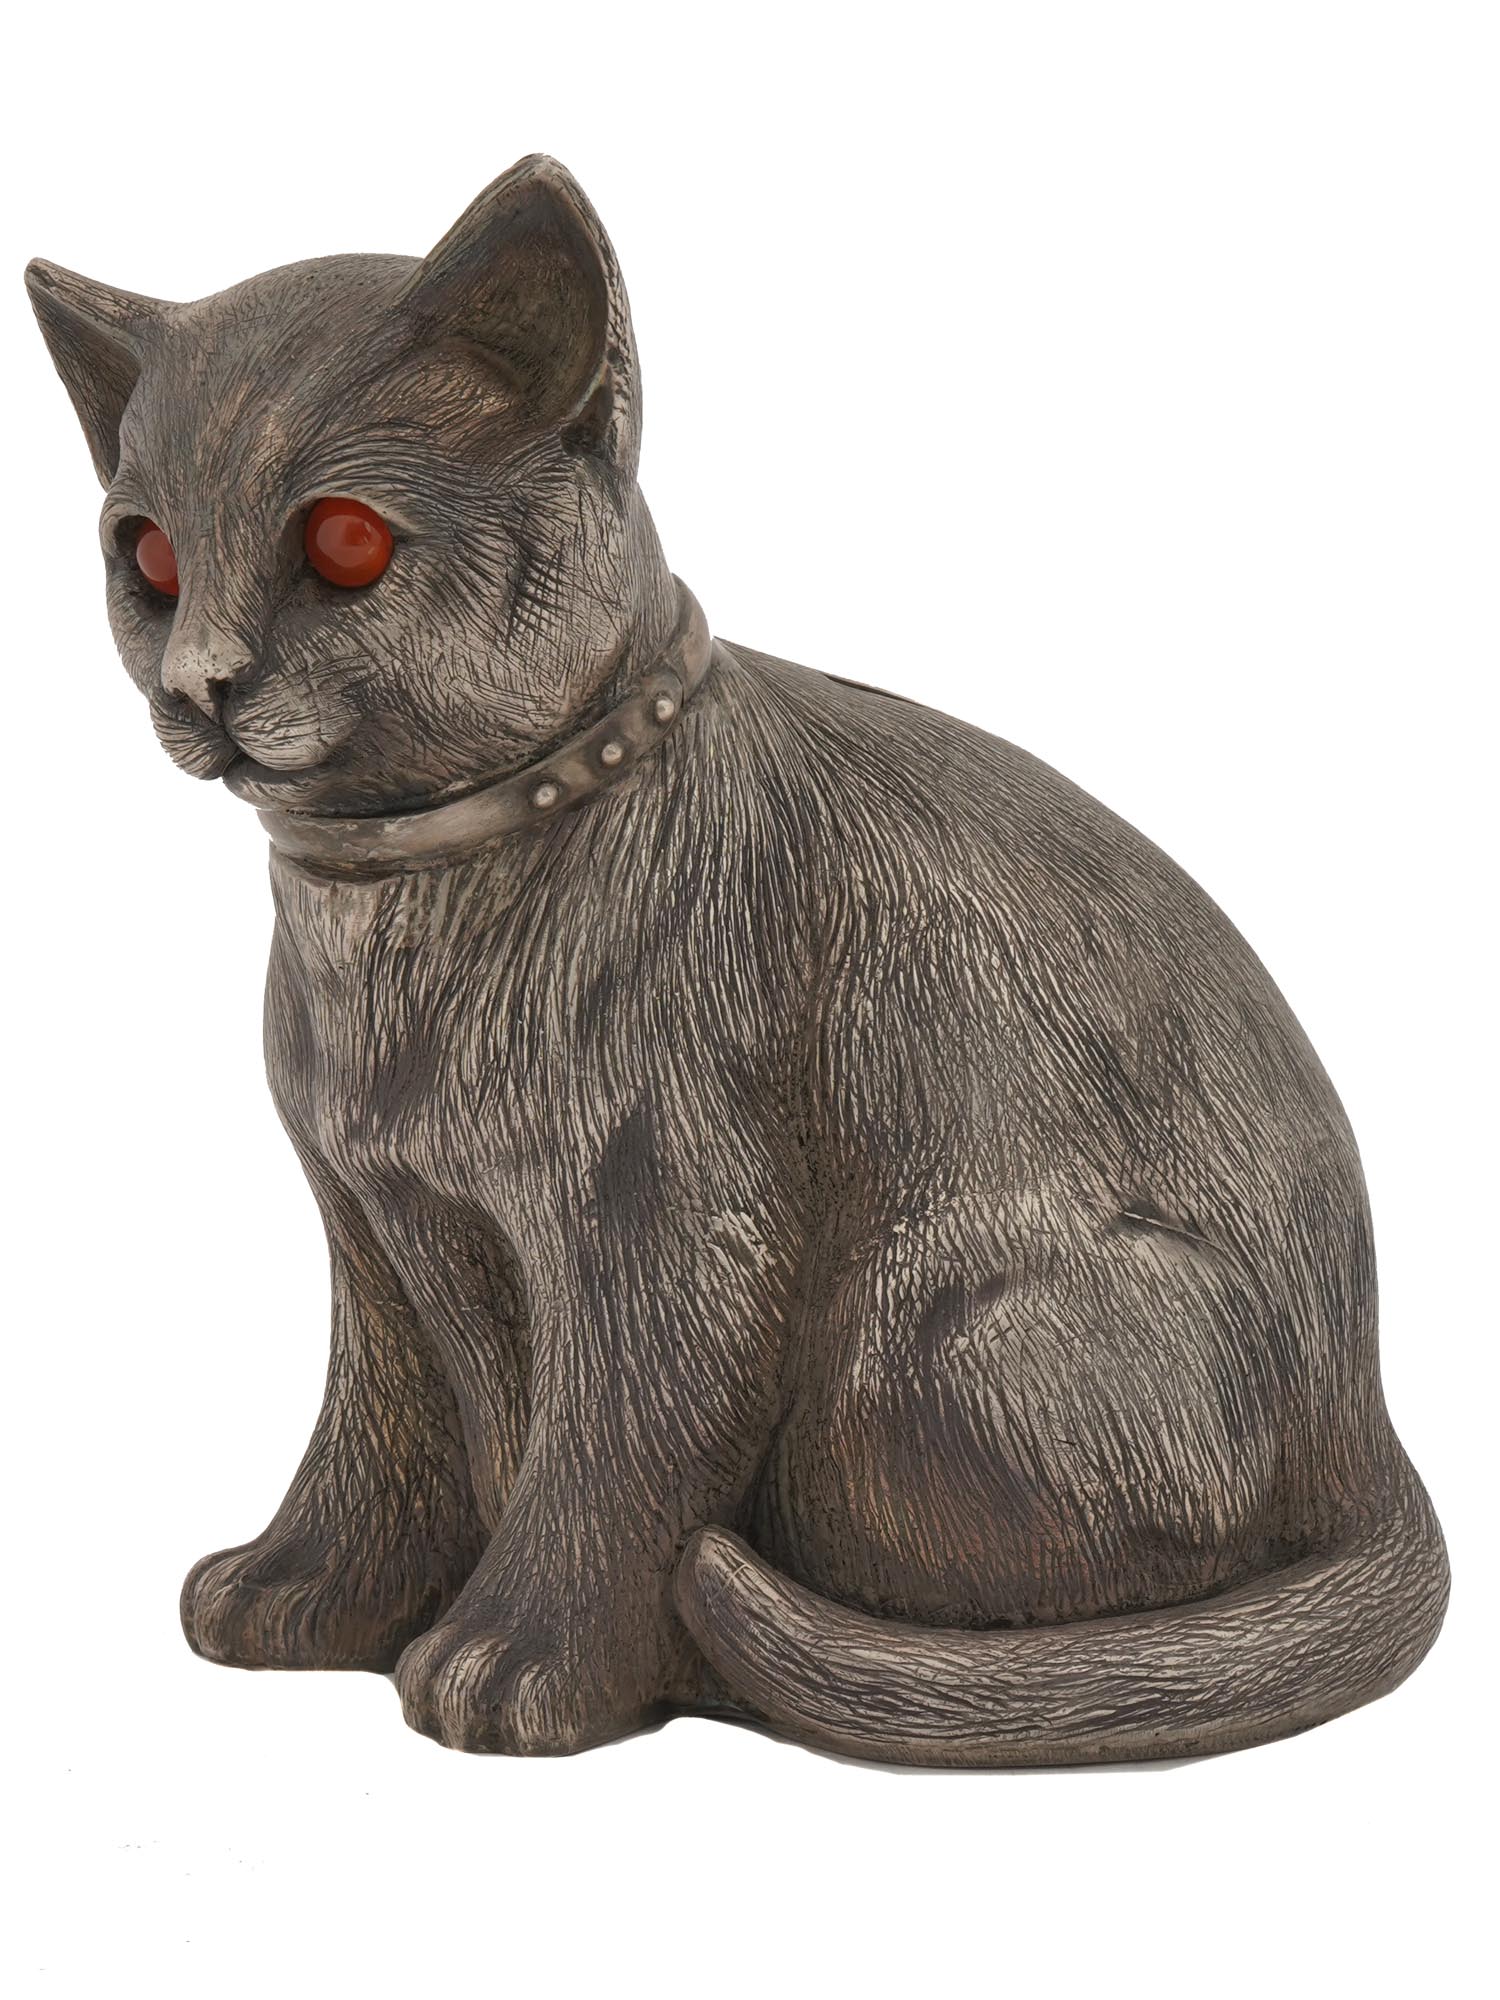 RUSSIAN 84 SILVER CARVED CAT FIGURINE MONEY BANK PIC-0